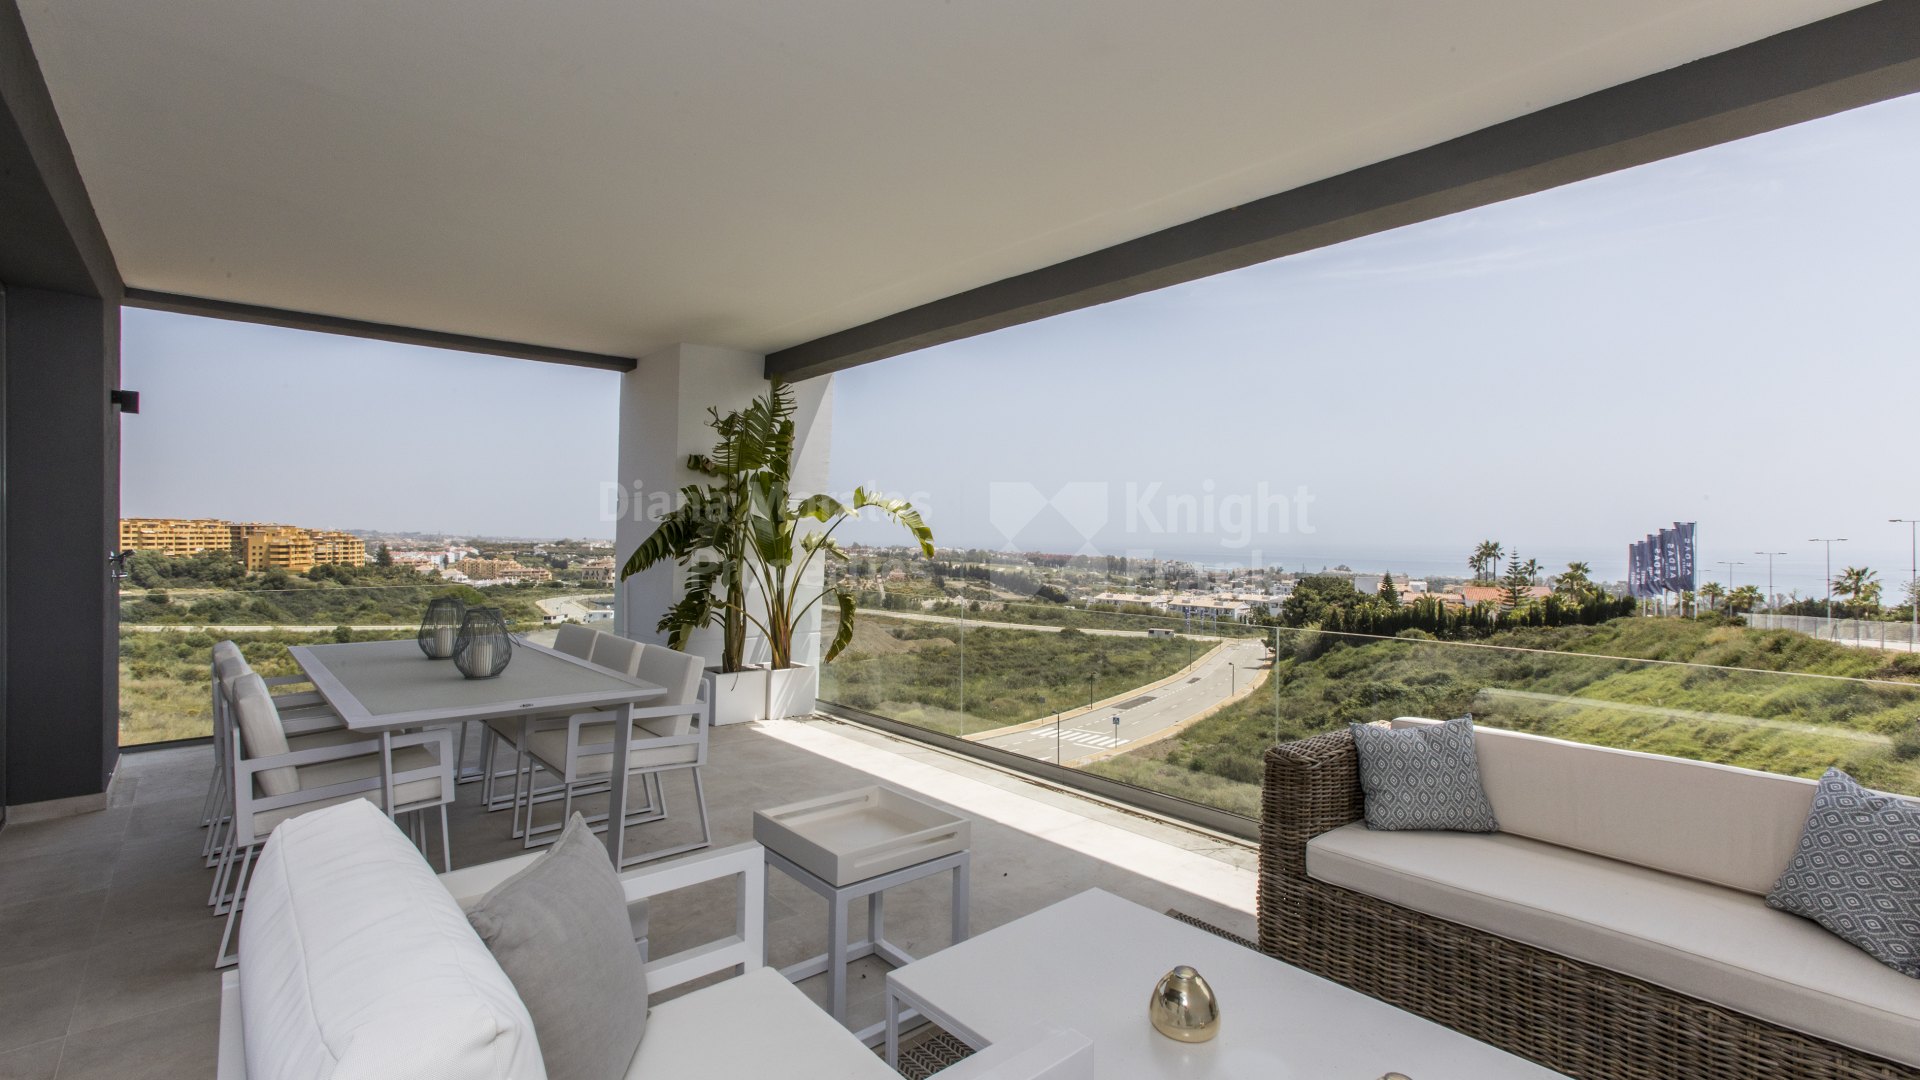 Vanian Green Village, your new home in Estepona with everything you need. NOW PHASE 2 AVAILABLE FOR SALE